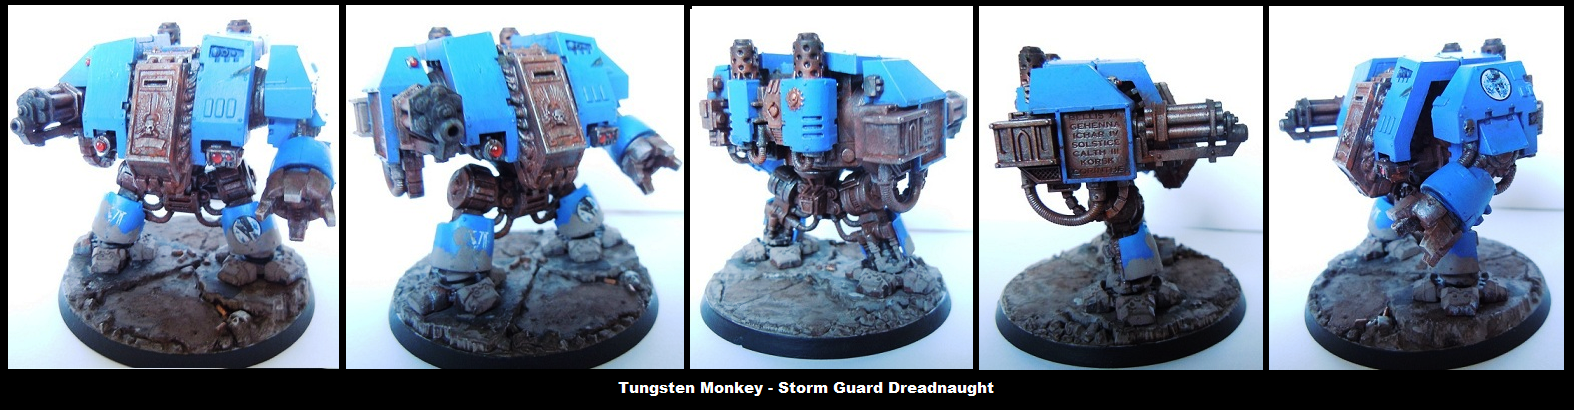 Dreadnought, Space Marines, Storm, Storm Guard, Warhammer 40,000, Weathered